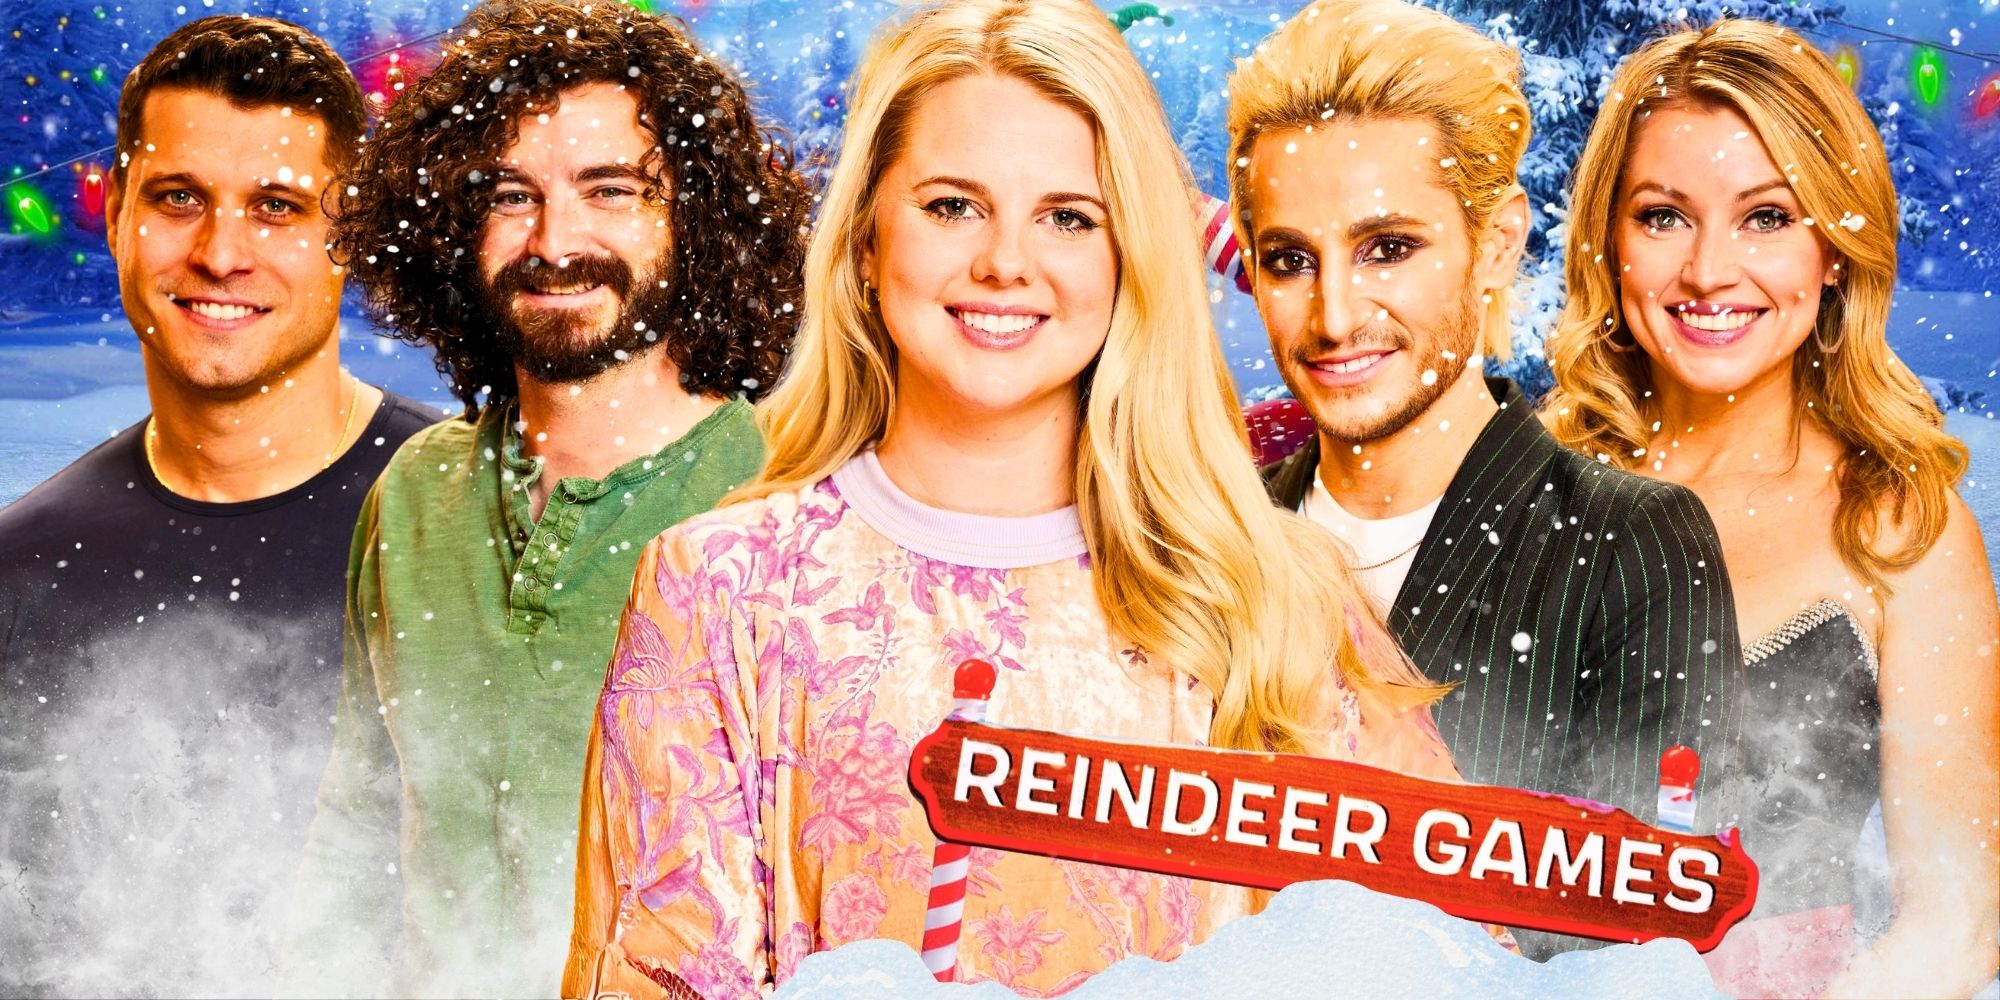 Big Brother Reindeer Games Is A Surprise Hit With Fans After Extremely